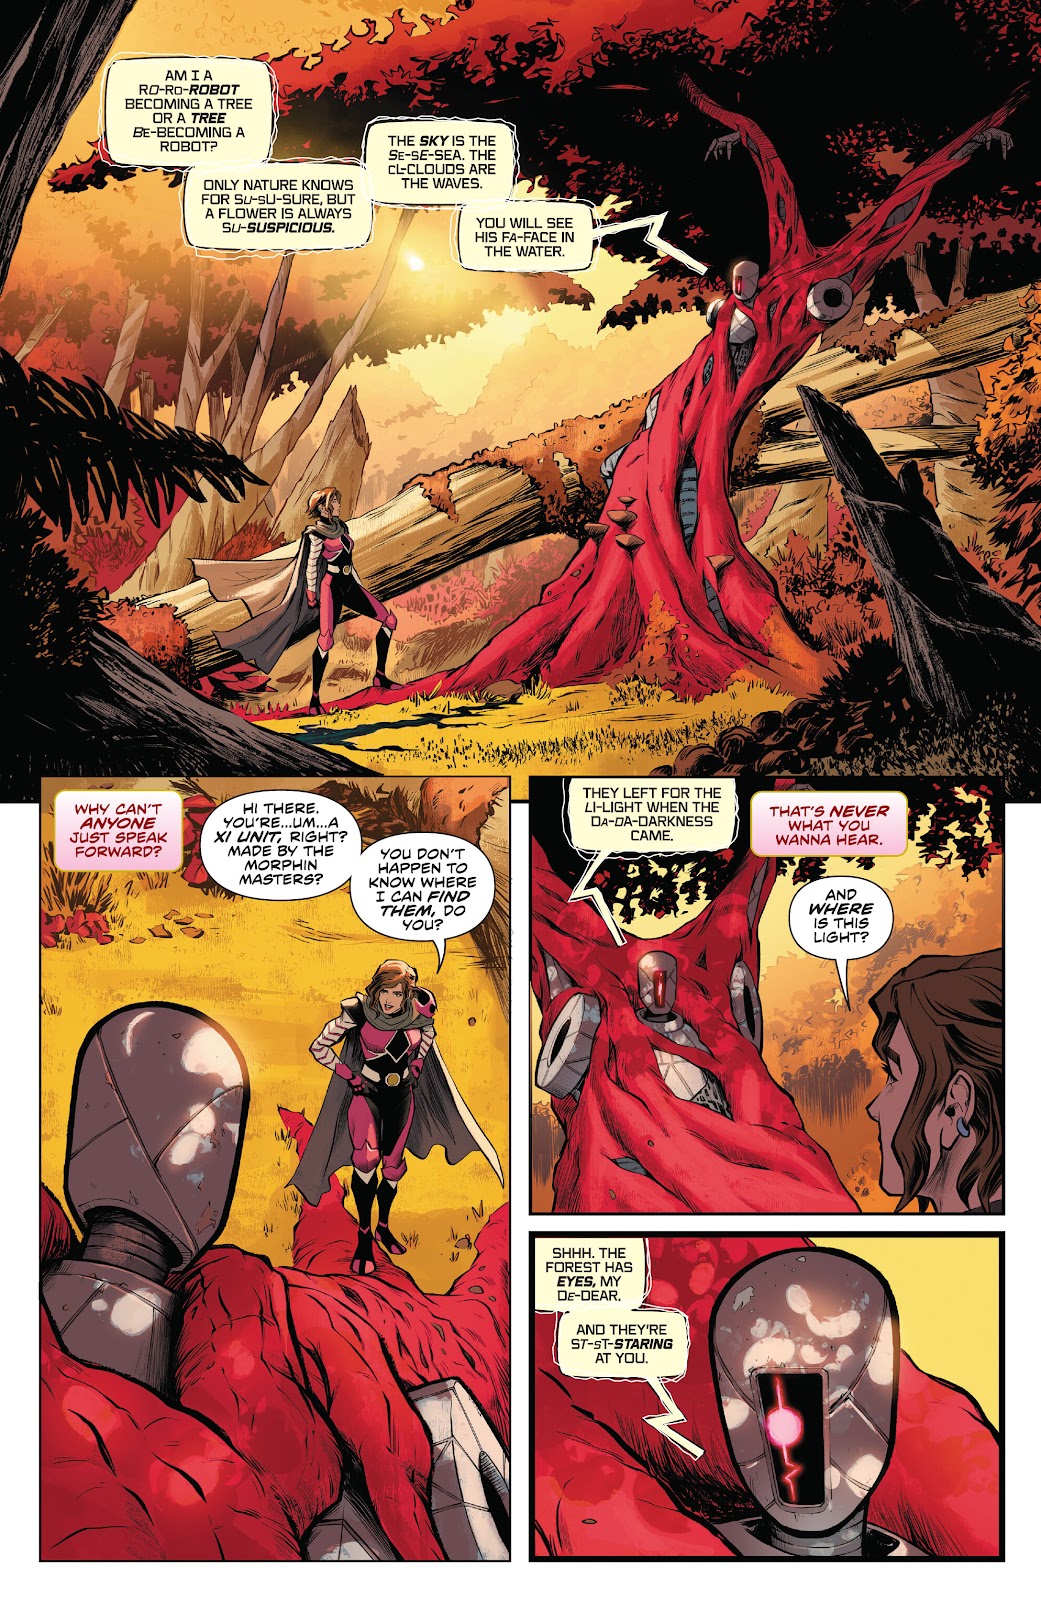 Power Rangers Unlimited: The Morphin Masters issue 1 - Page 6